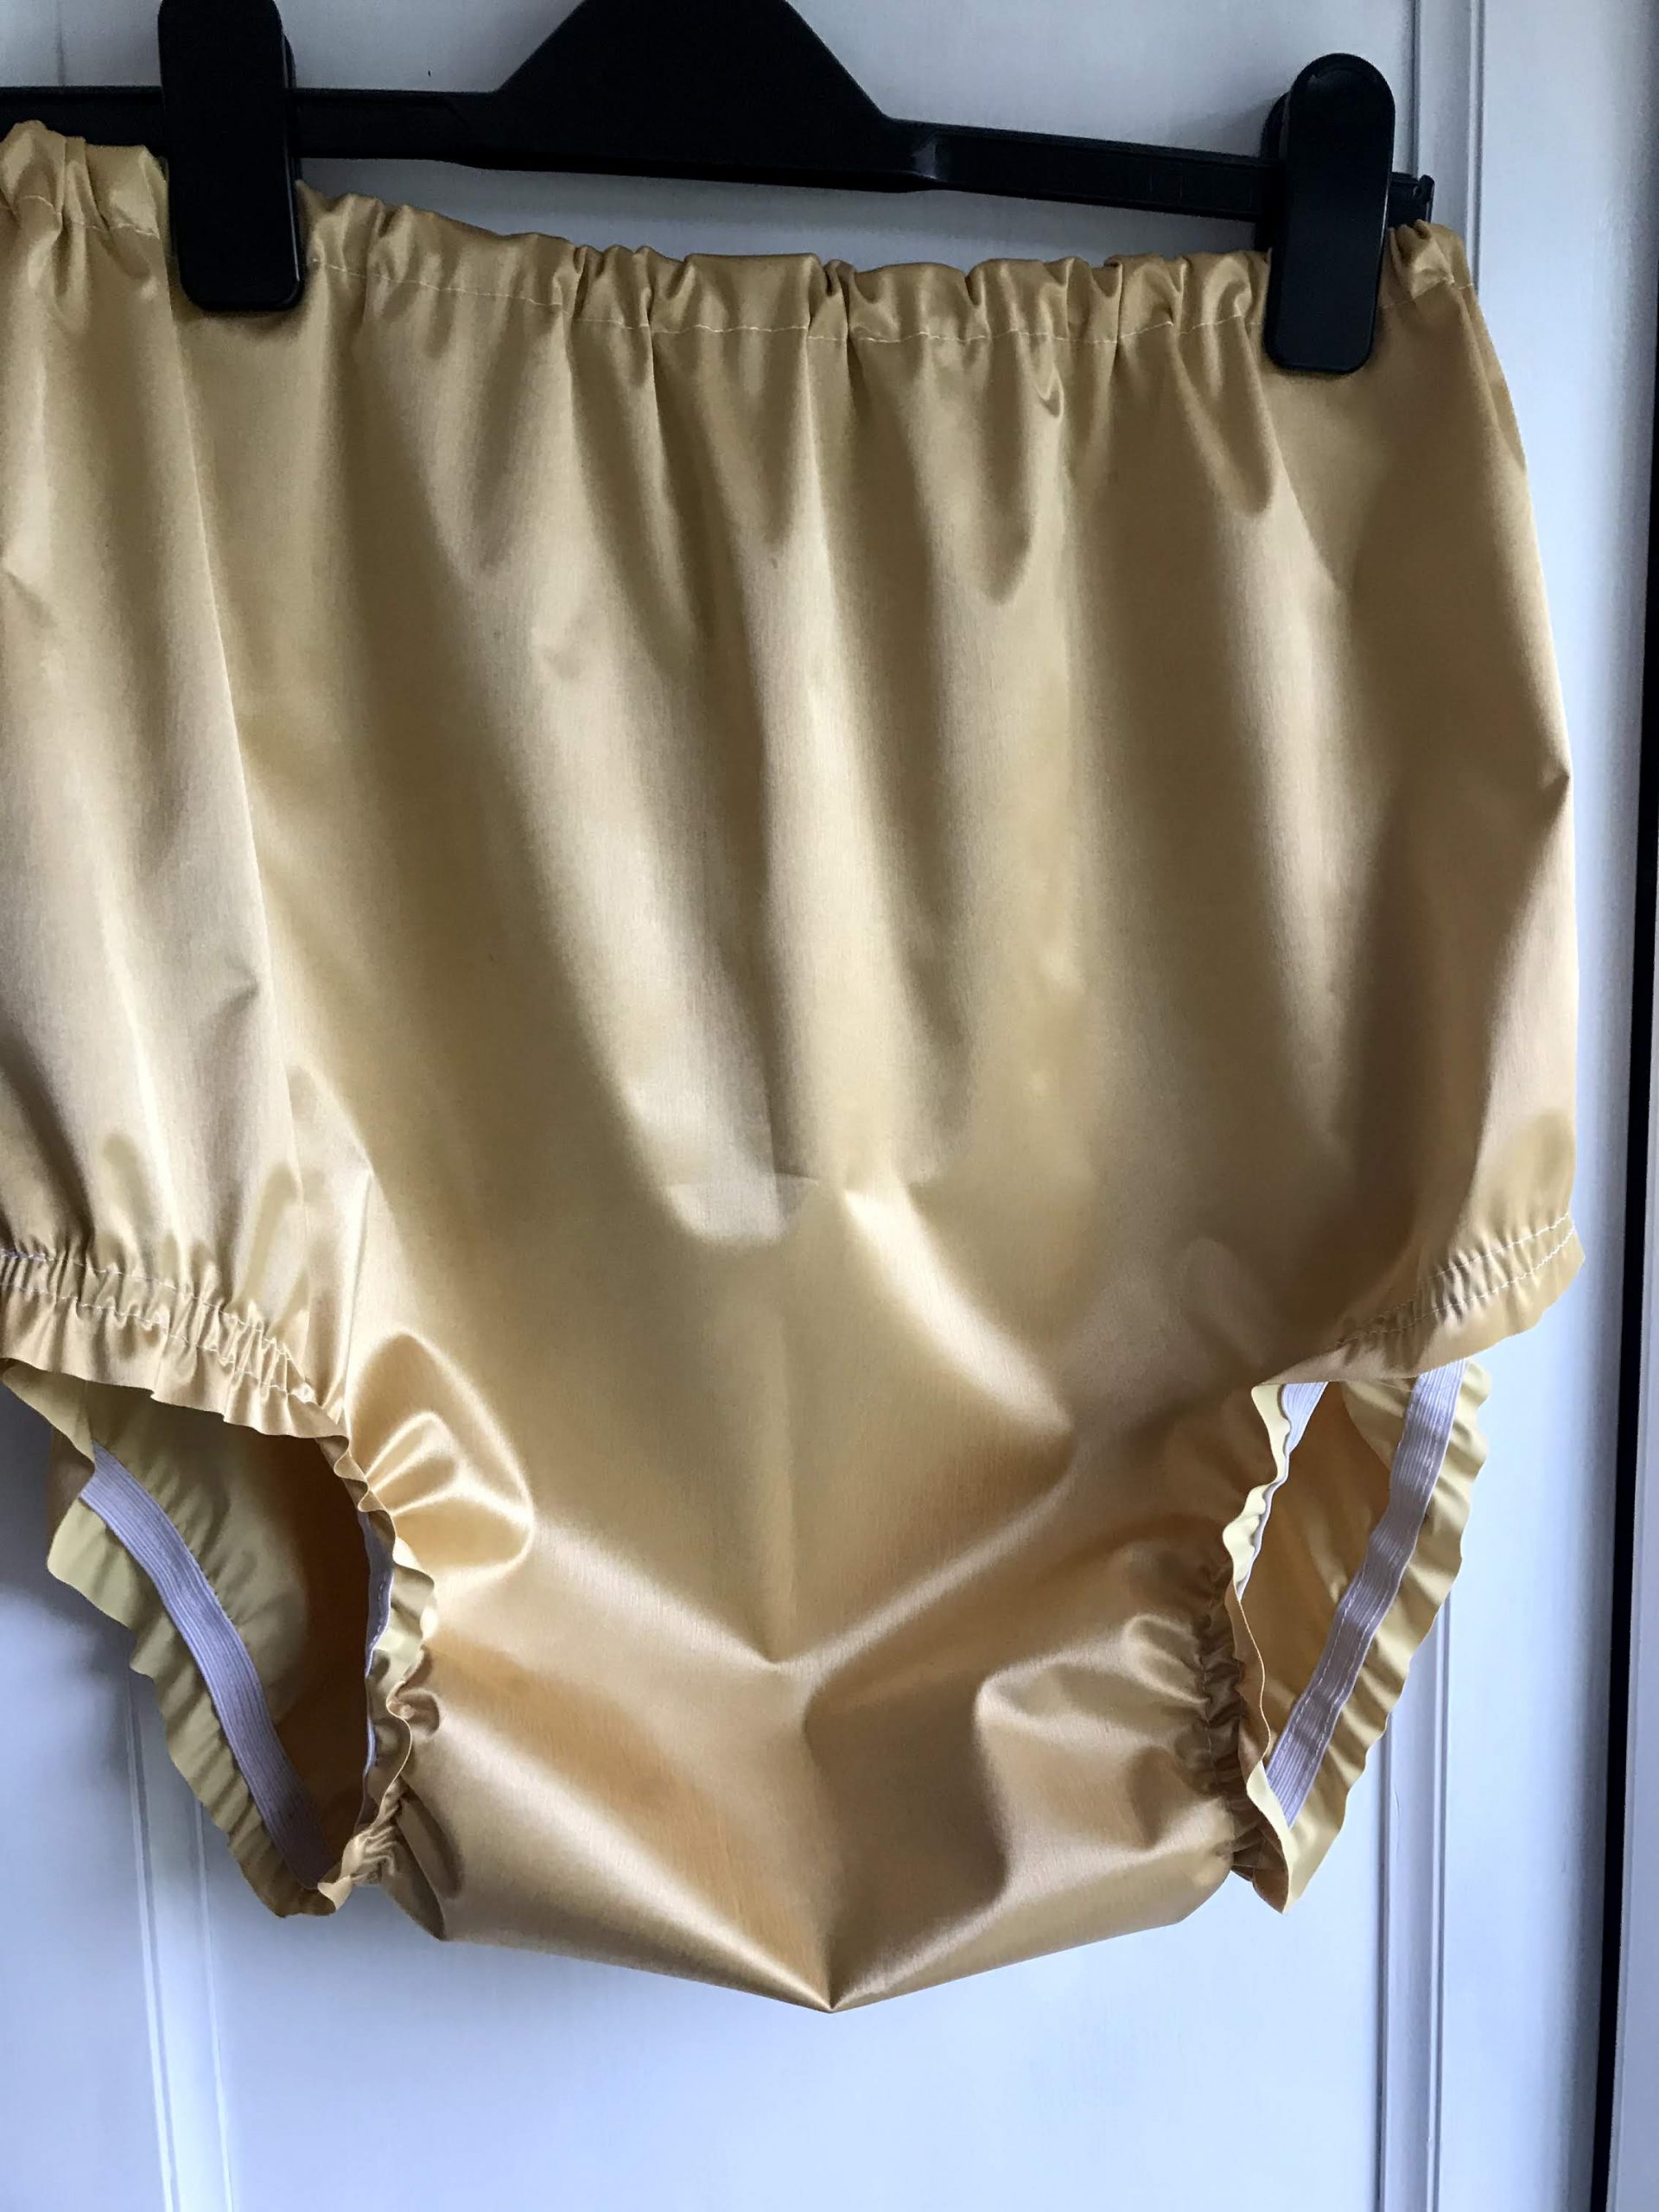 Gold satin rubber lined Incontinence pants